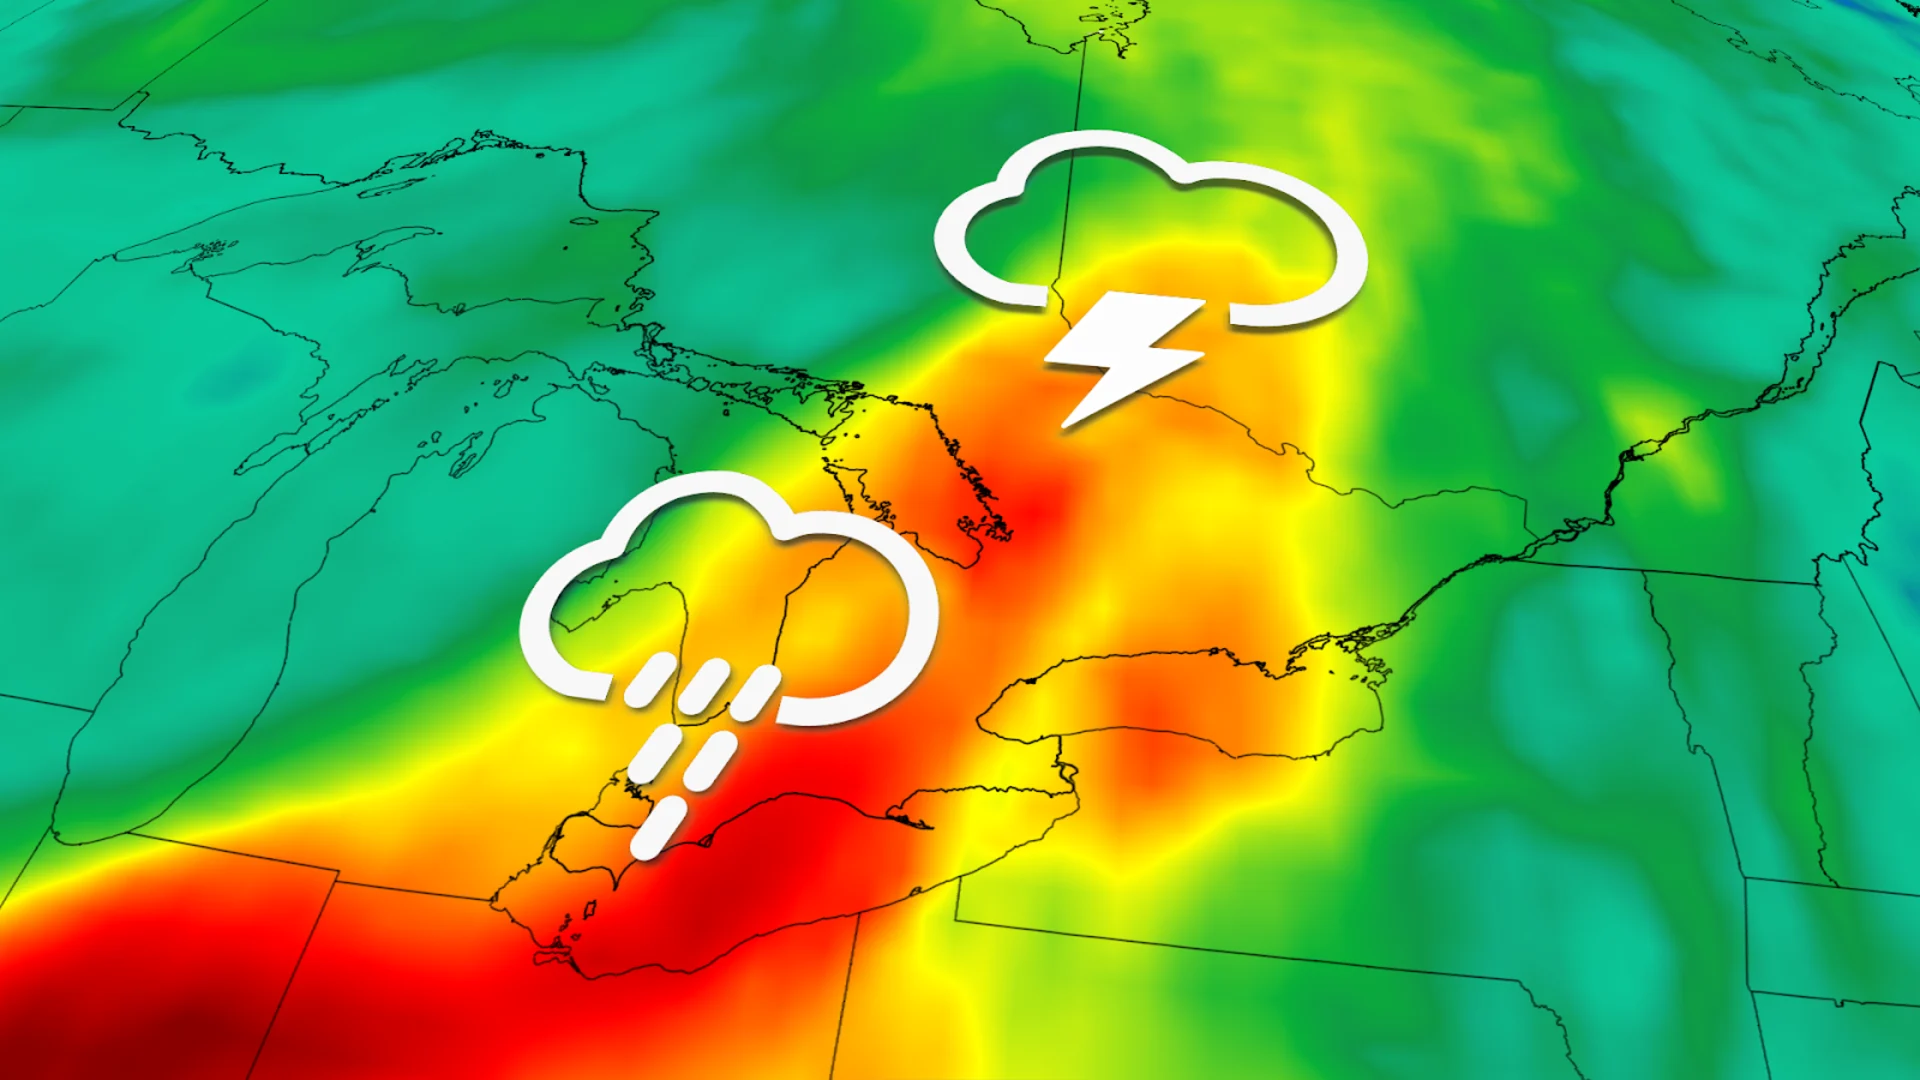 Keep your ears open for any rumbles of thunder today, Ontario! See your stormy forecast, here